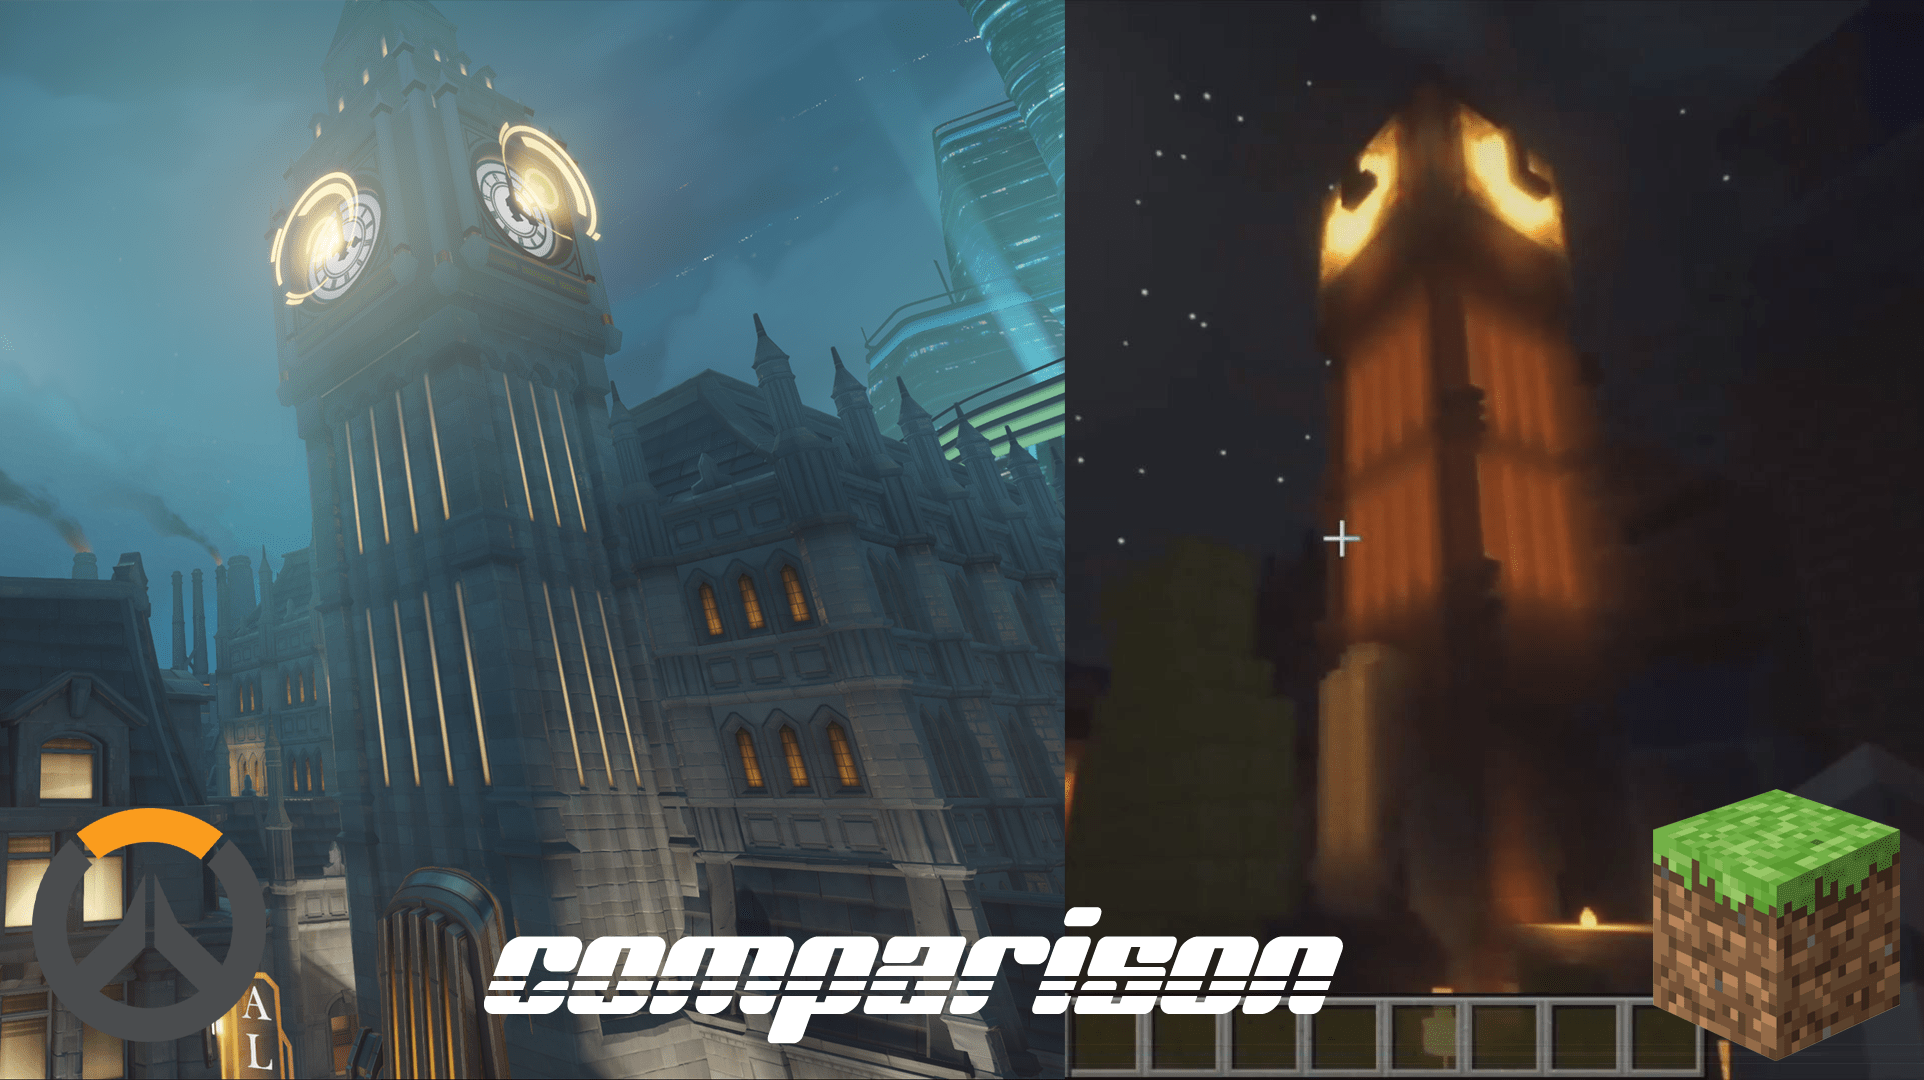 Overwatch’s King’s Row Has Been Recreated In Minecraft: Anyone Up For A Quick Match?